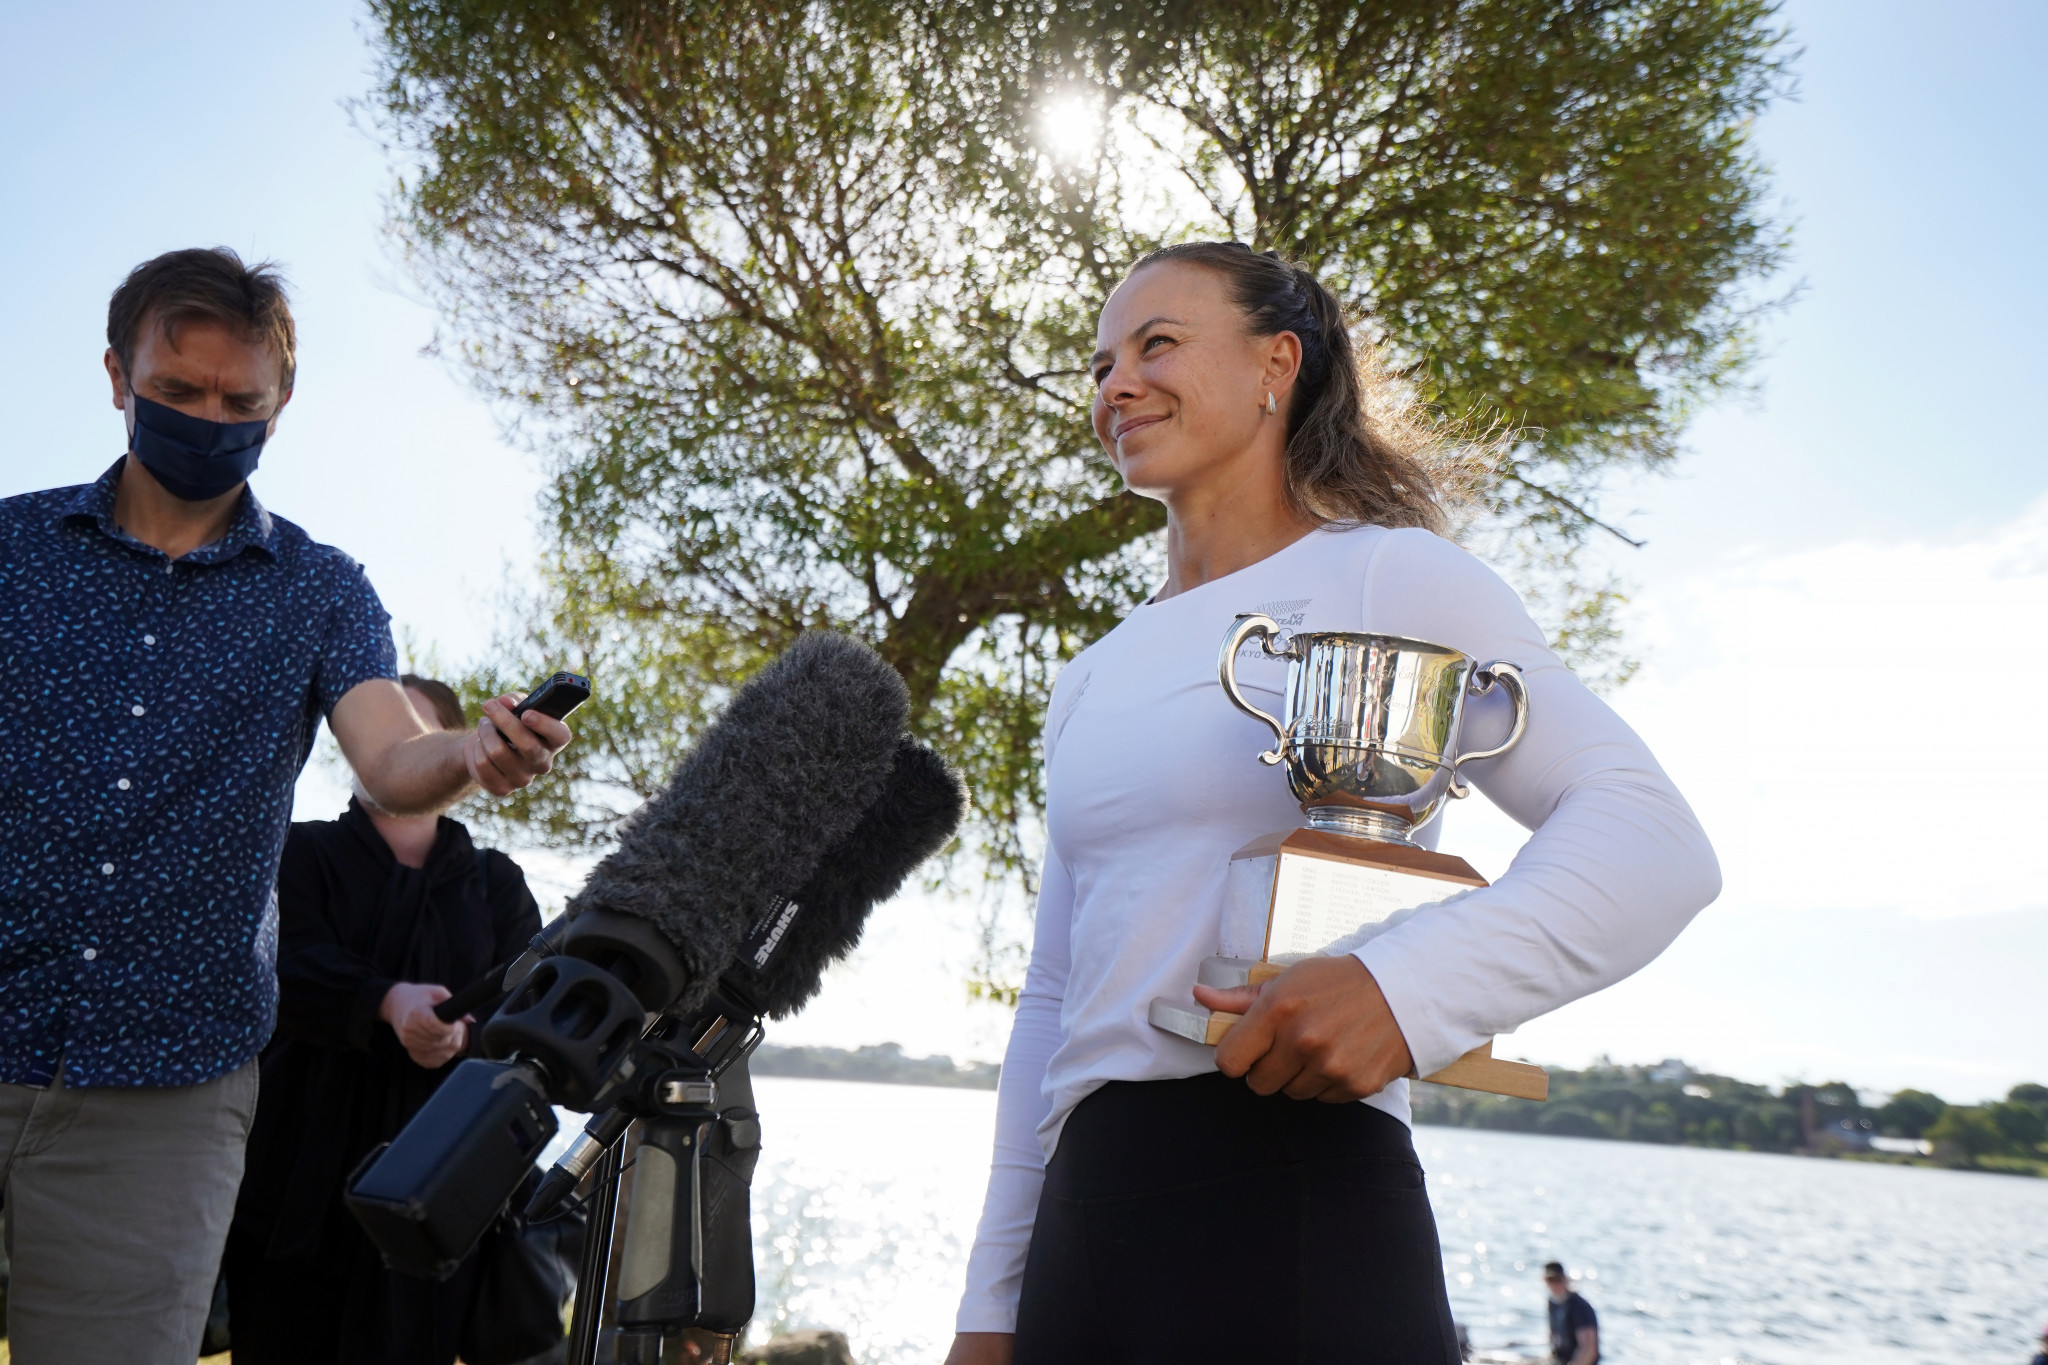 Dame Lisa Carrington, pictured here with the Lonsdale Cup, is set to compete in the women's 1,500m kayak race at the NZCT & New Zealand Canoe Sprint Championships  ©Getty Images